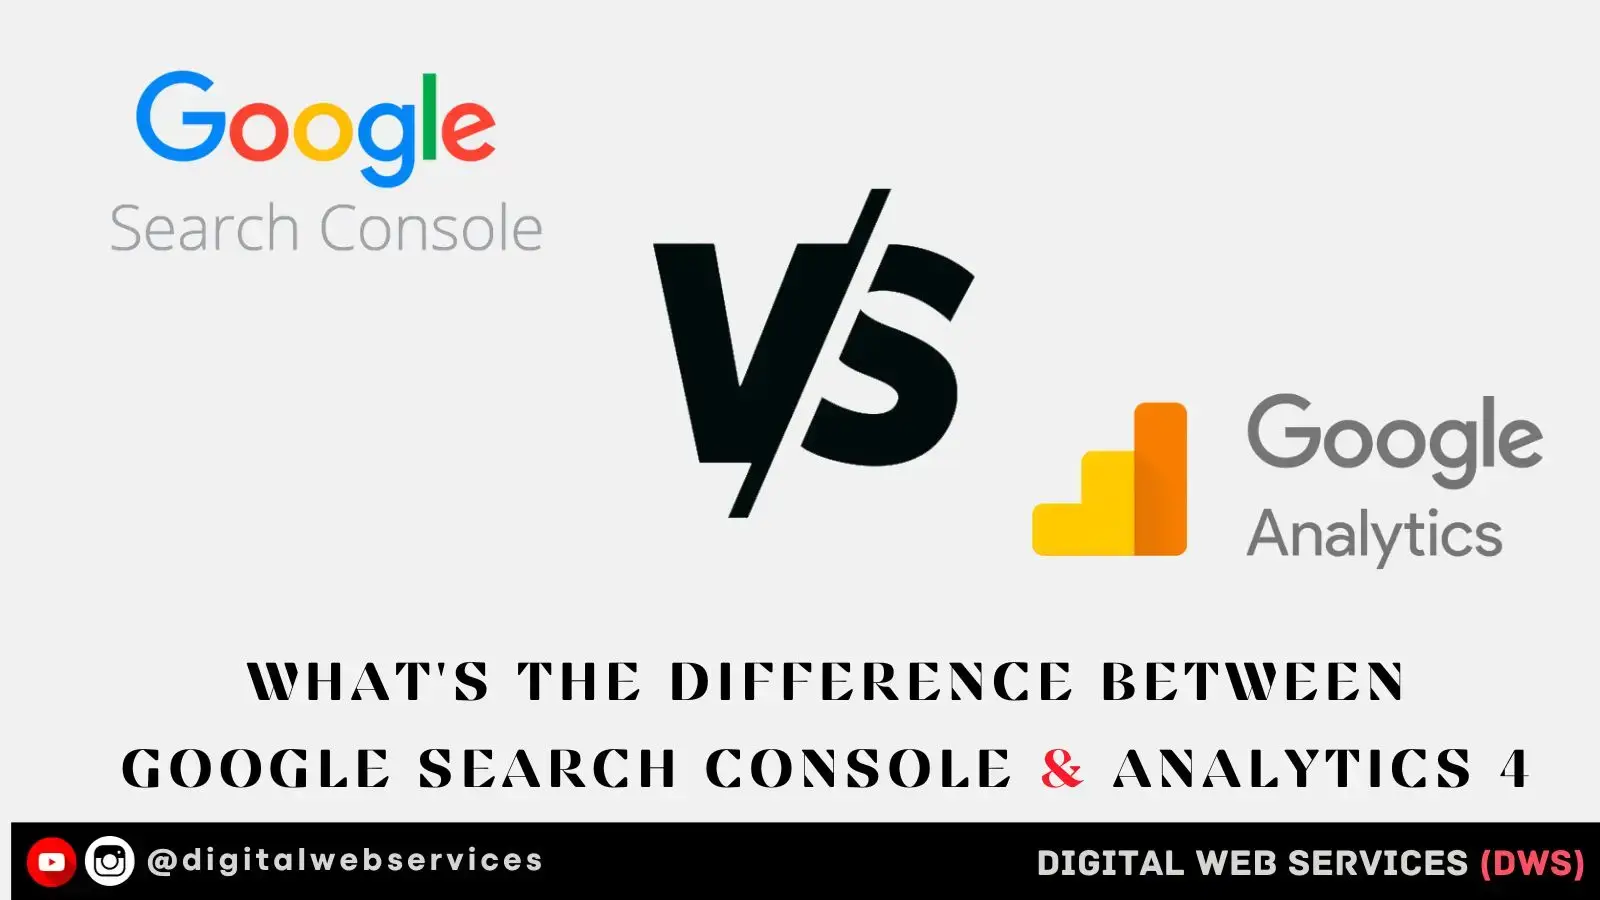 Difference Between Google Search Console and Analytics 4